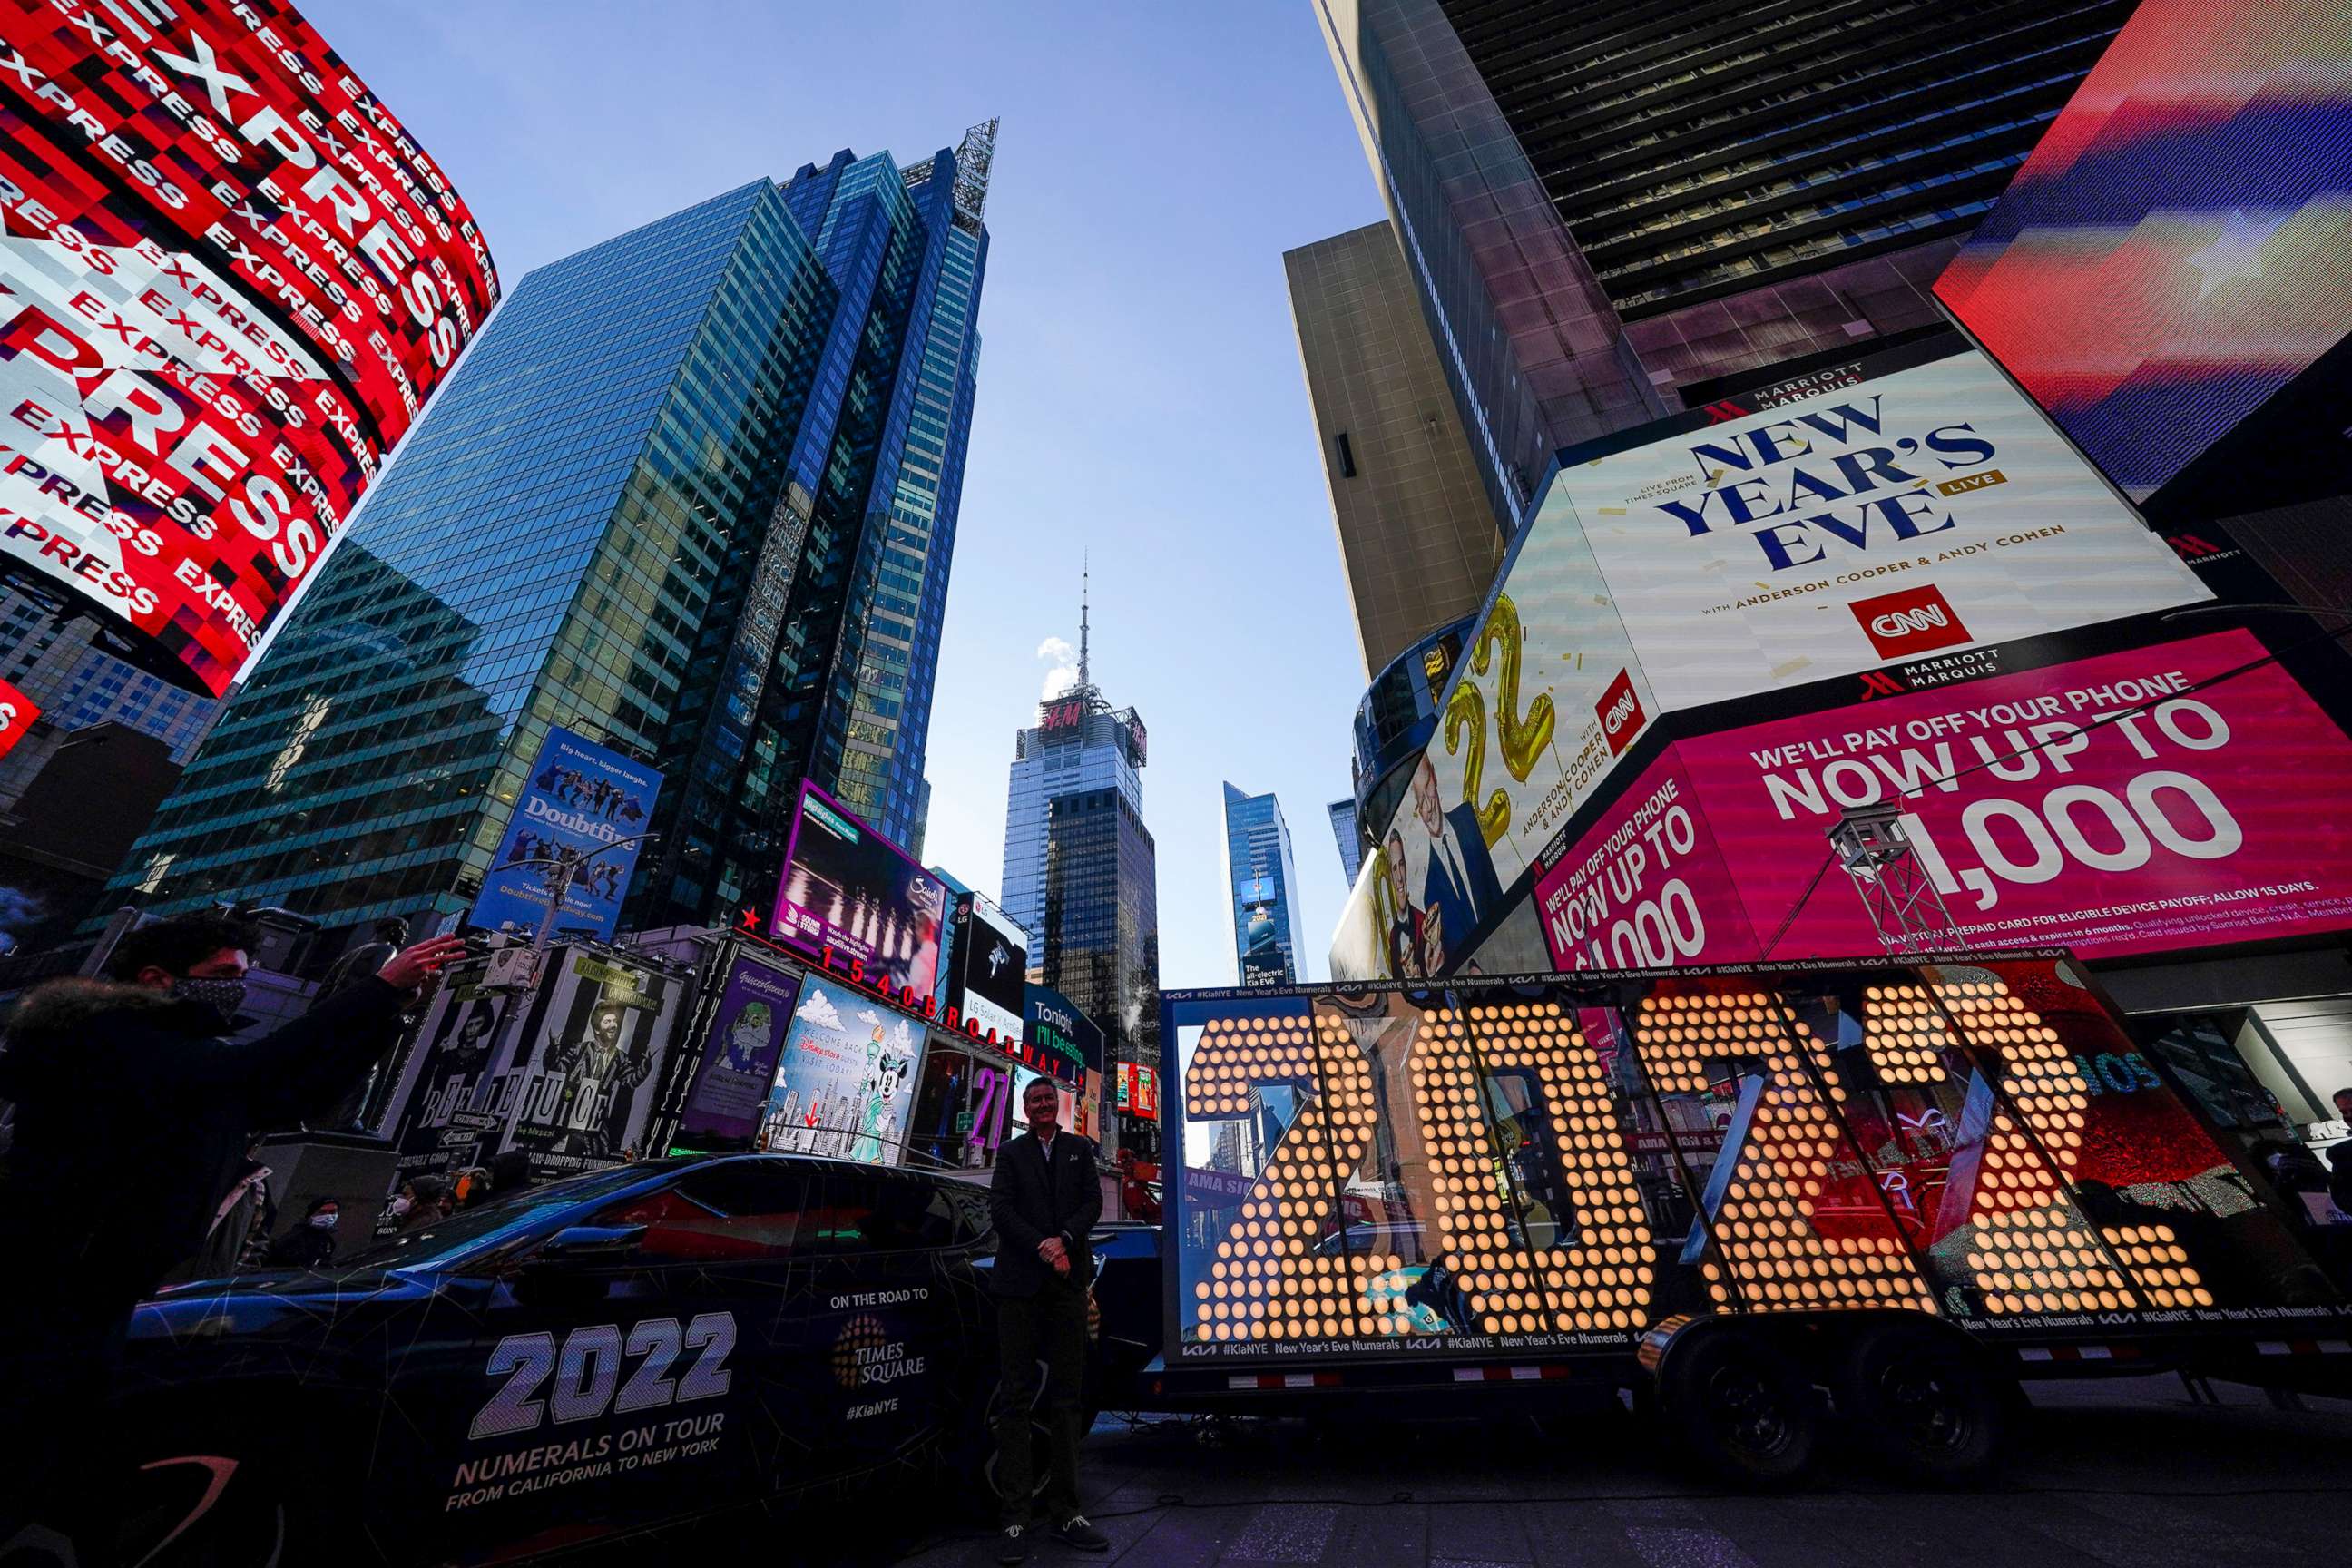 PHOTO: The 2022 sign that will be lit on top of a building on New Year's Eve is displayed in Times Square, New York, Dec. 20, 2021. 